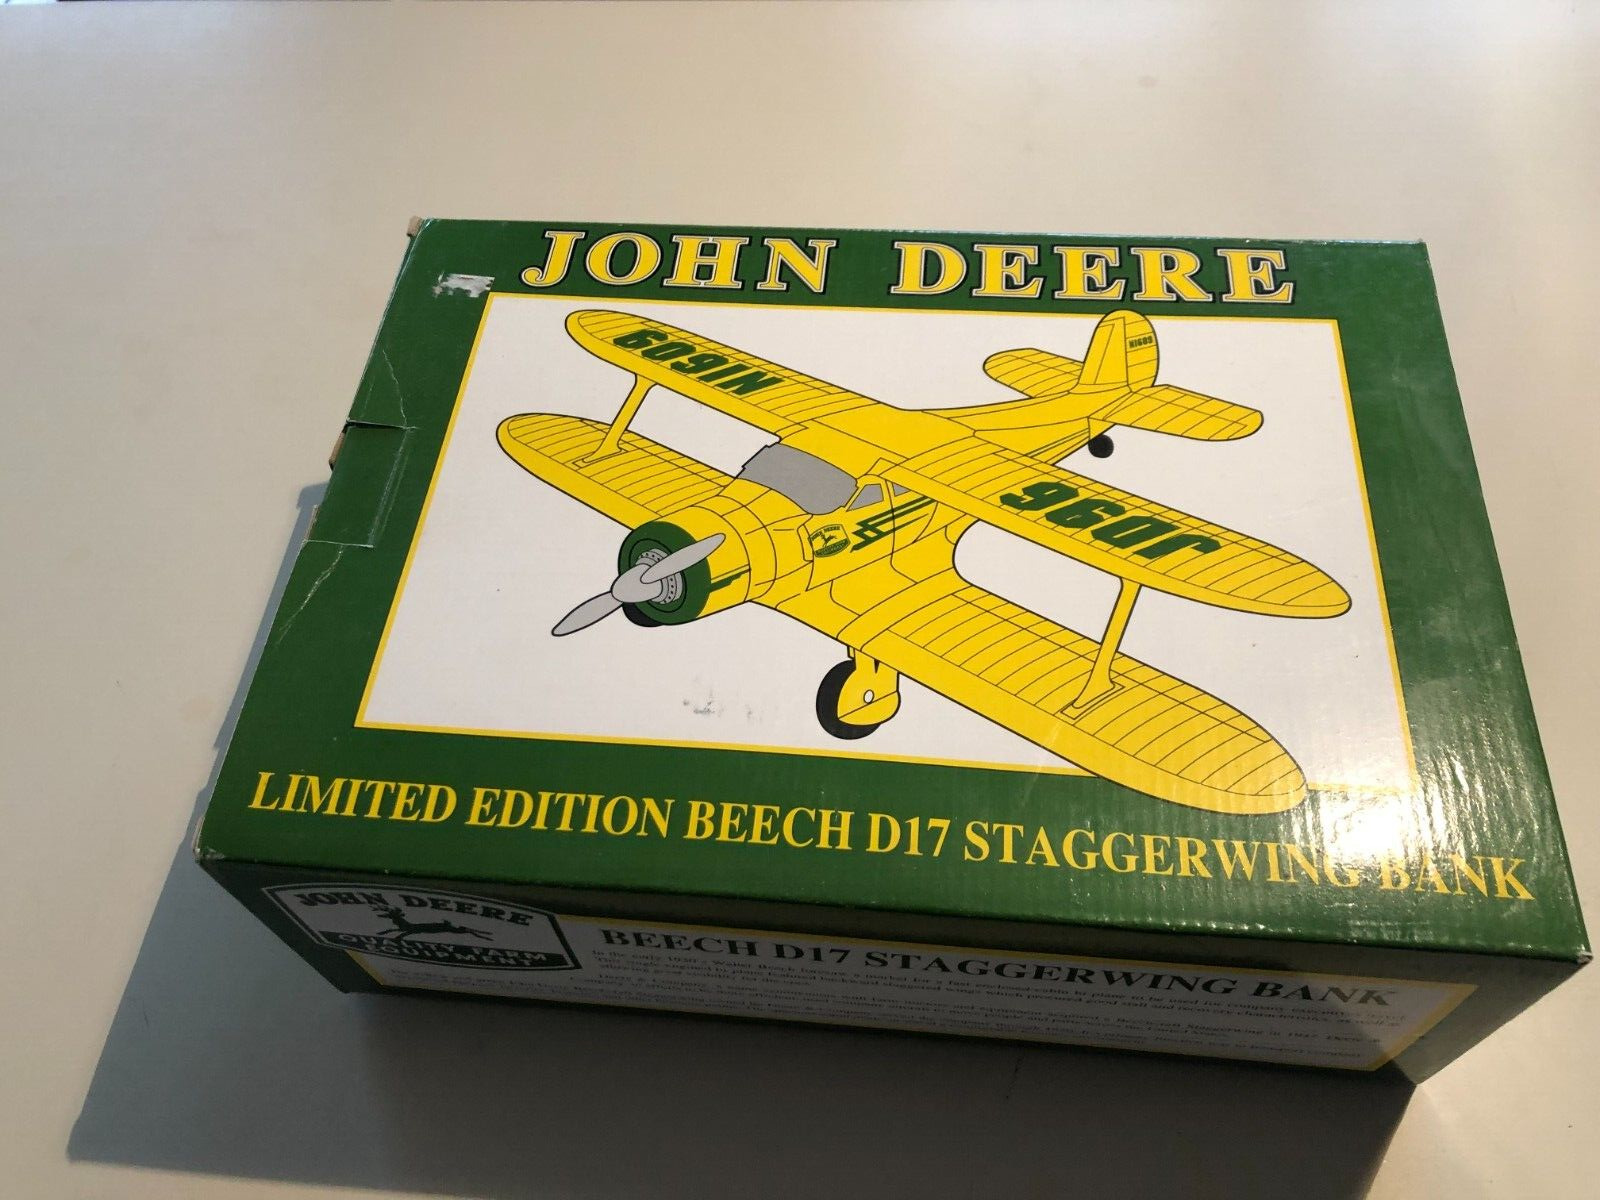 Limited Edition 1996 Beech D17 Staggerwing John Deere Airplane Bank By SpecCast